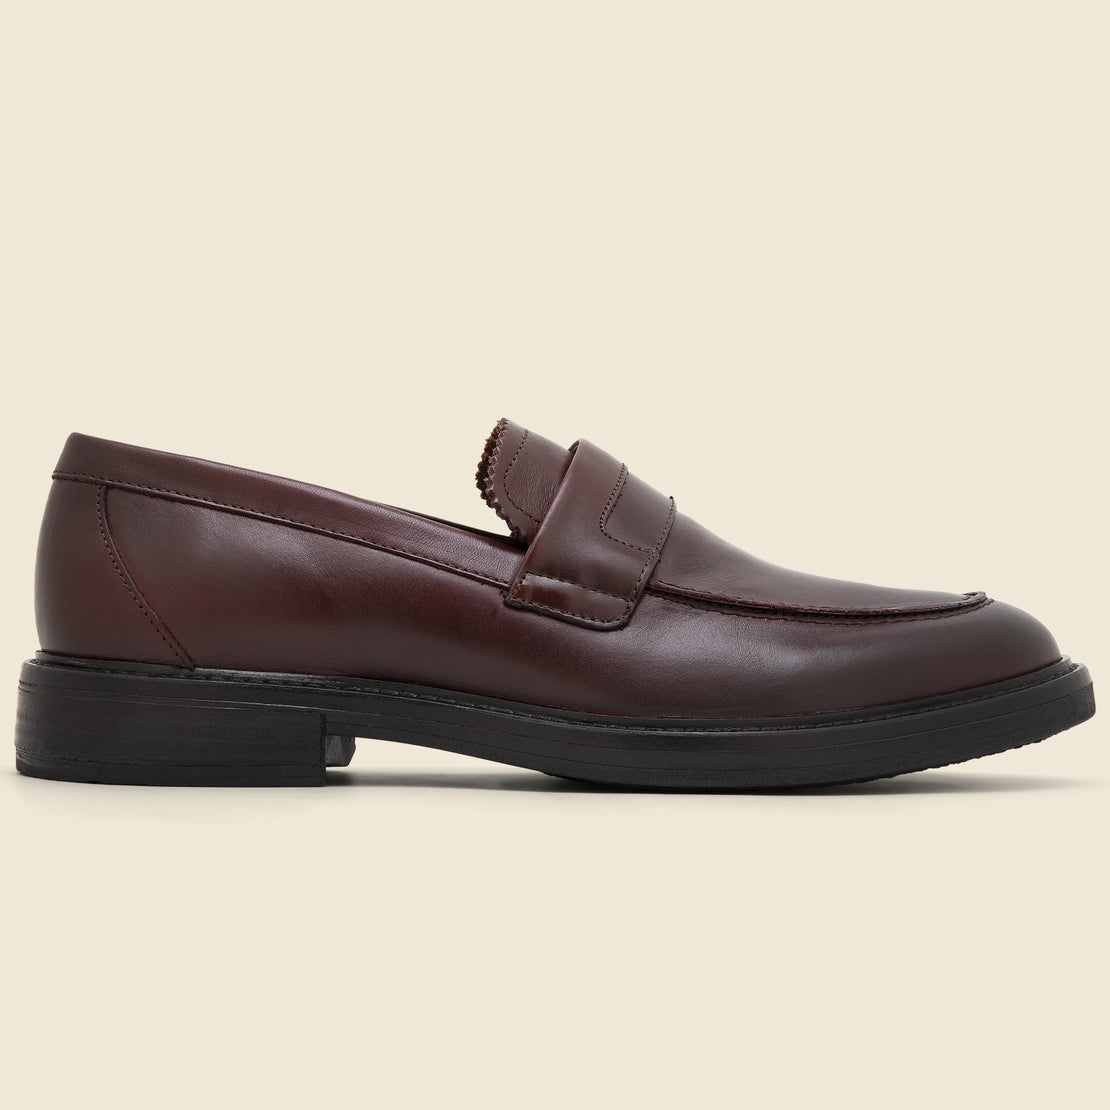 Shoe the Bear Stanley Leather Loafer - Chestnut